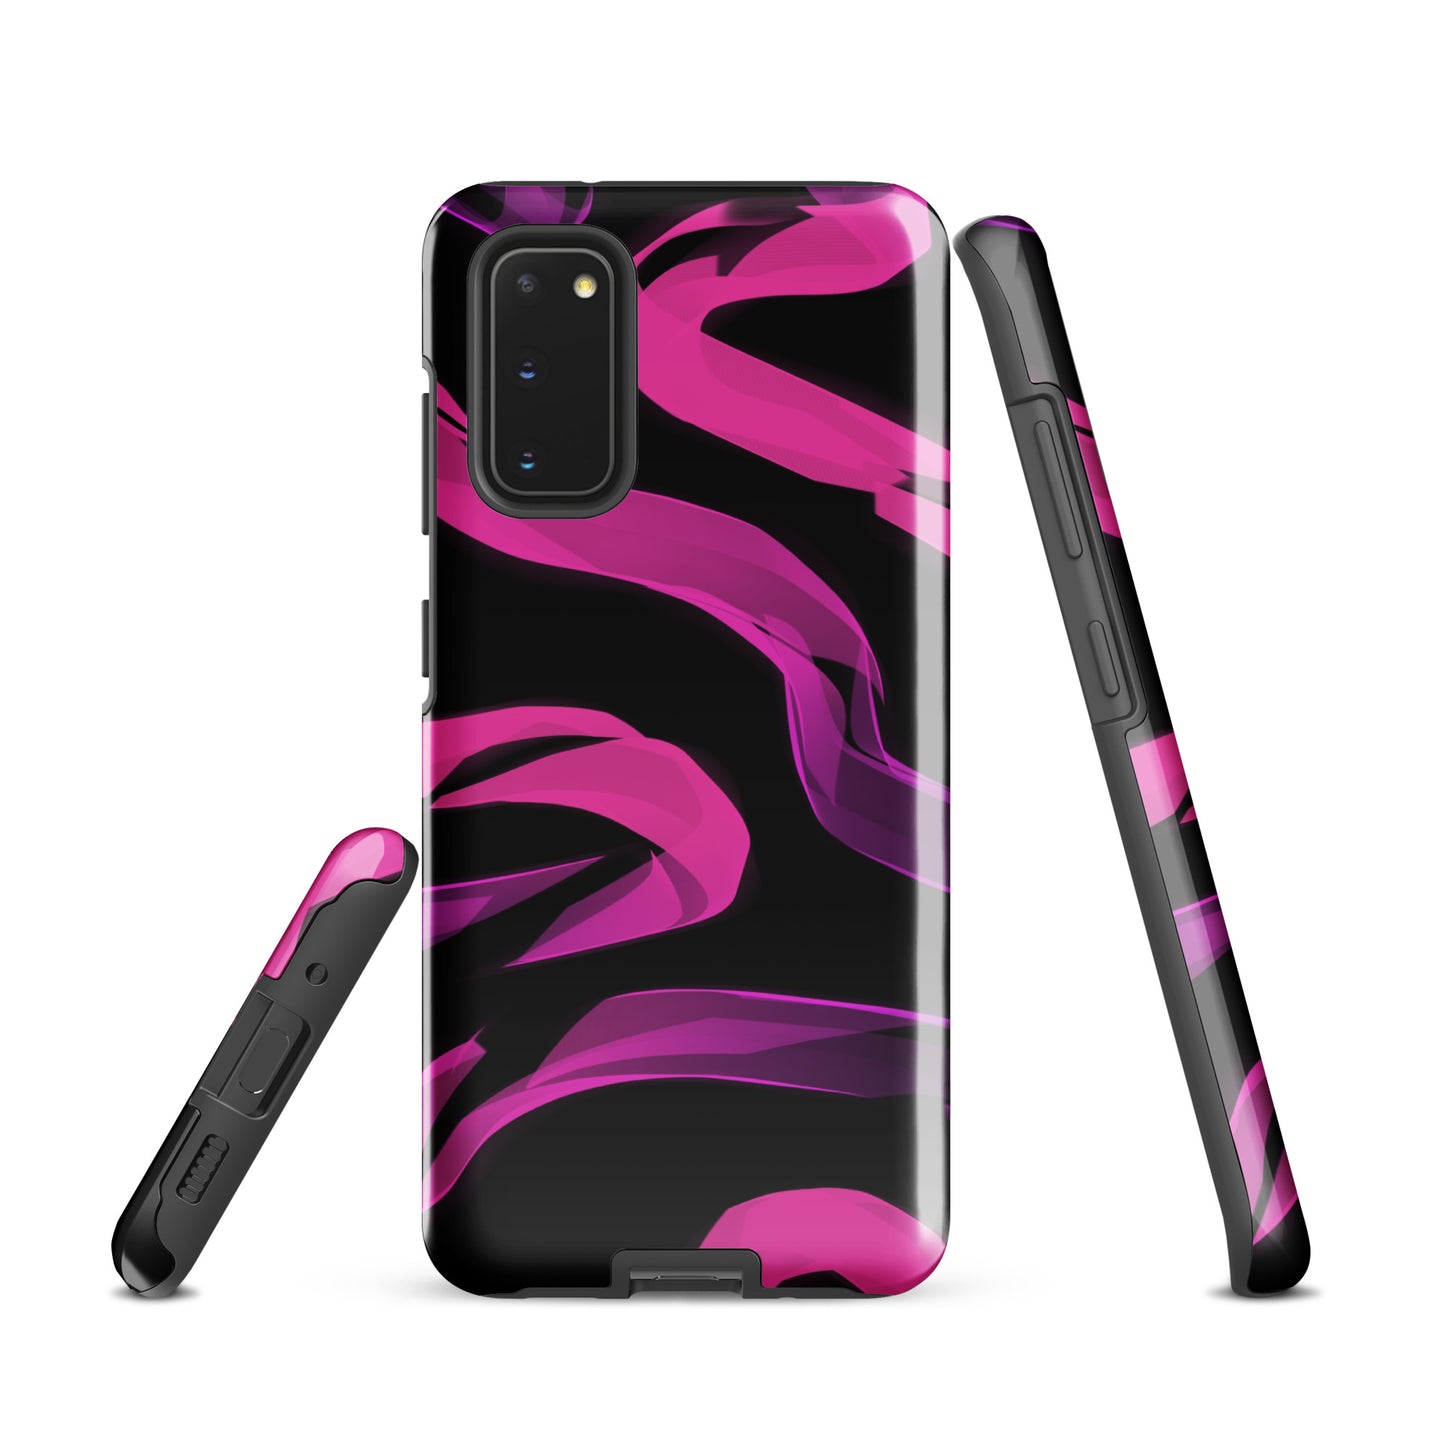 A Bright Pink Neon Sketch Case for the Samsung Galaxy S20